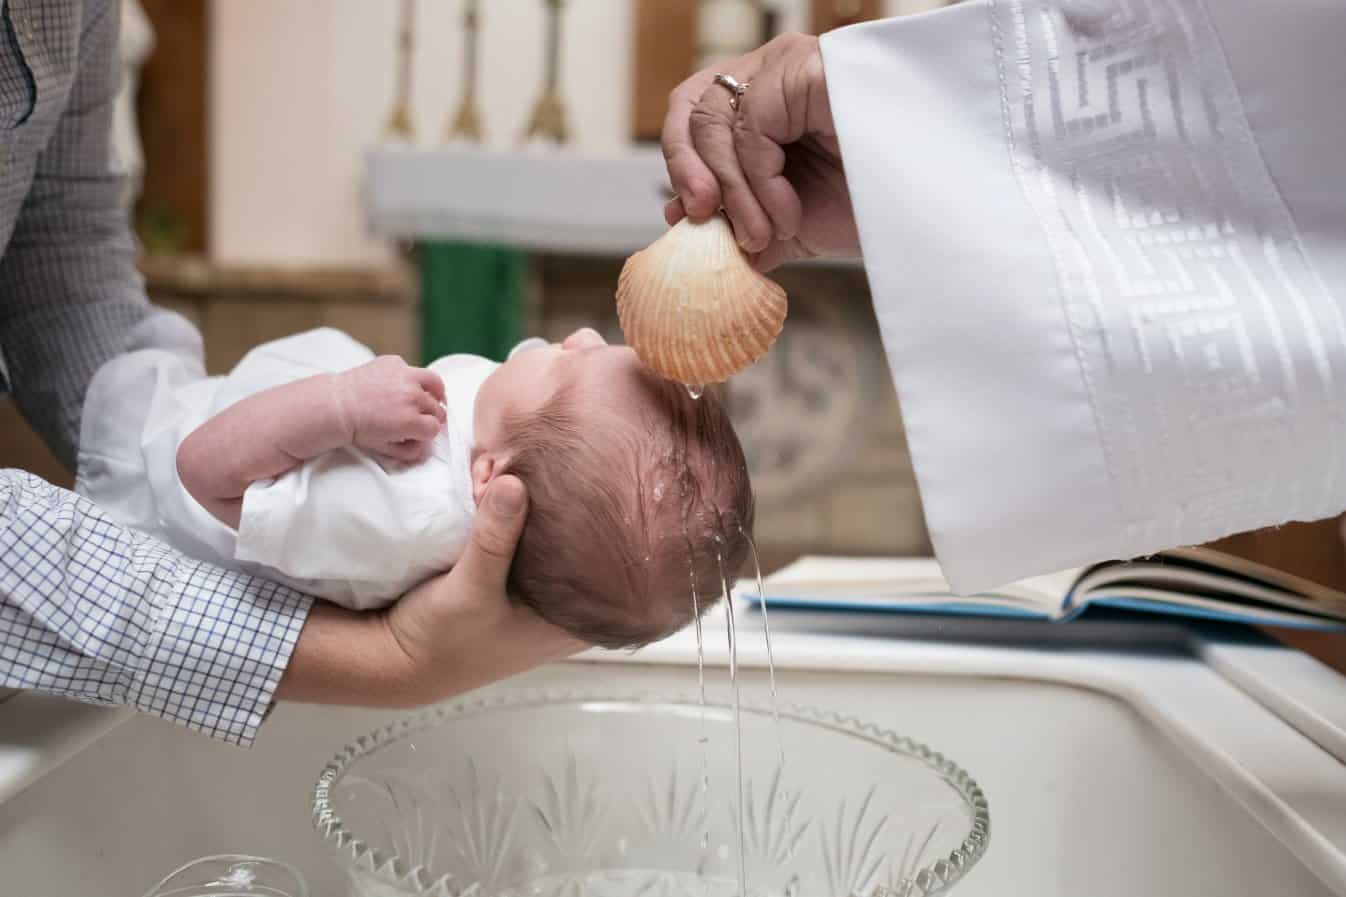 A Christian baby getting baptized in a church